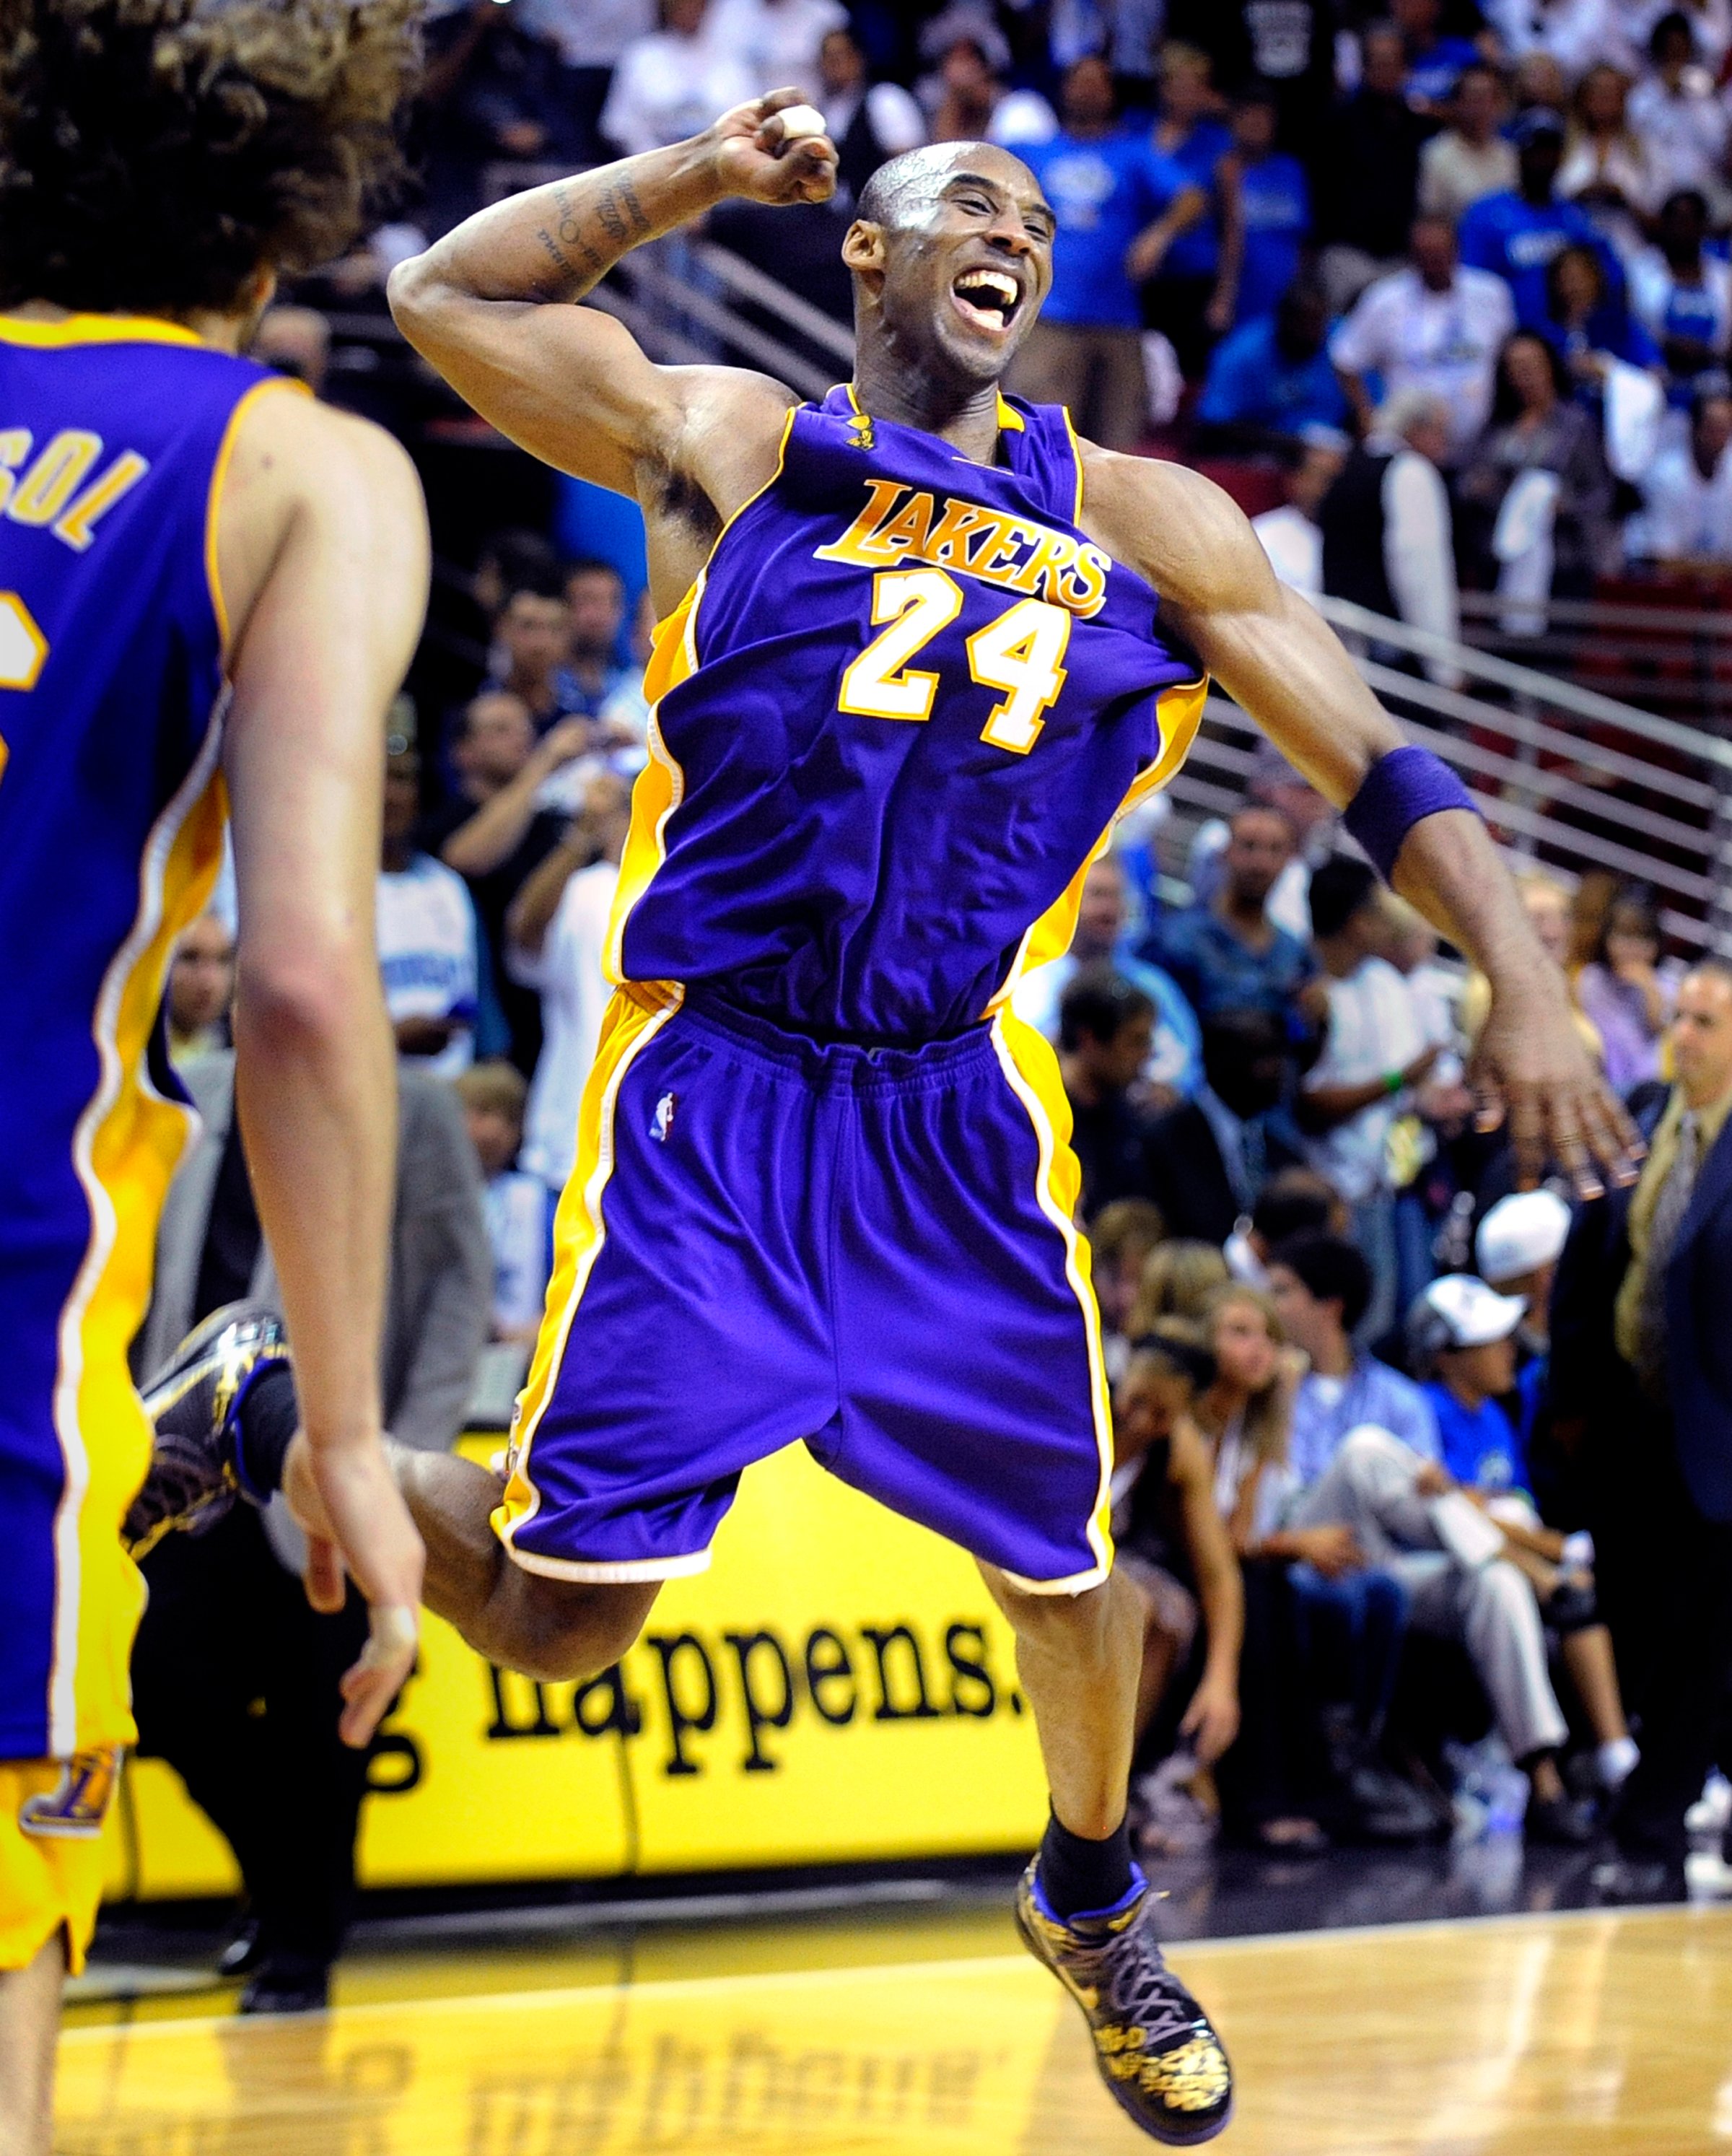 Los Angeles Lakers' Kobe Bryant celebrates defeating the Orlando Magic to win the NBA basketball championship, four games to one, on June 14, 2009 in Orlando, Fla.